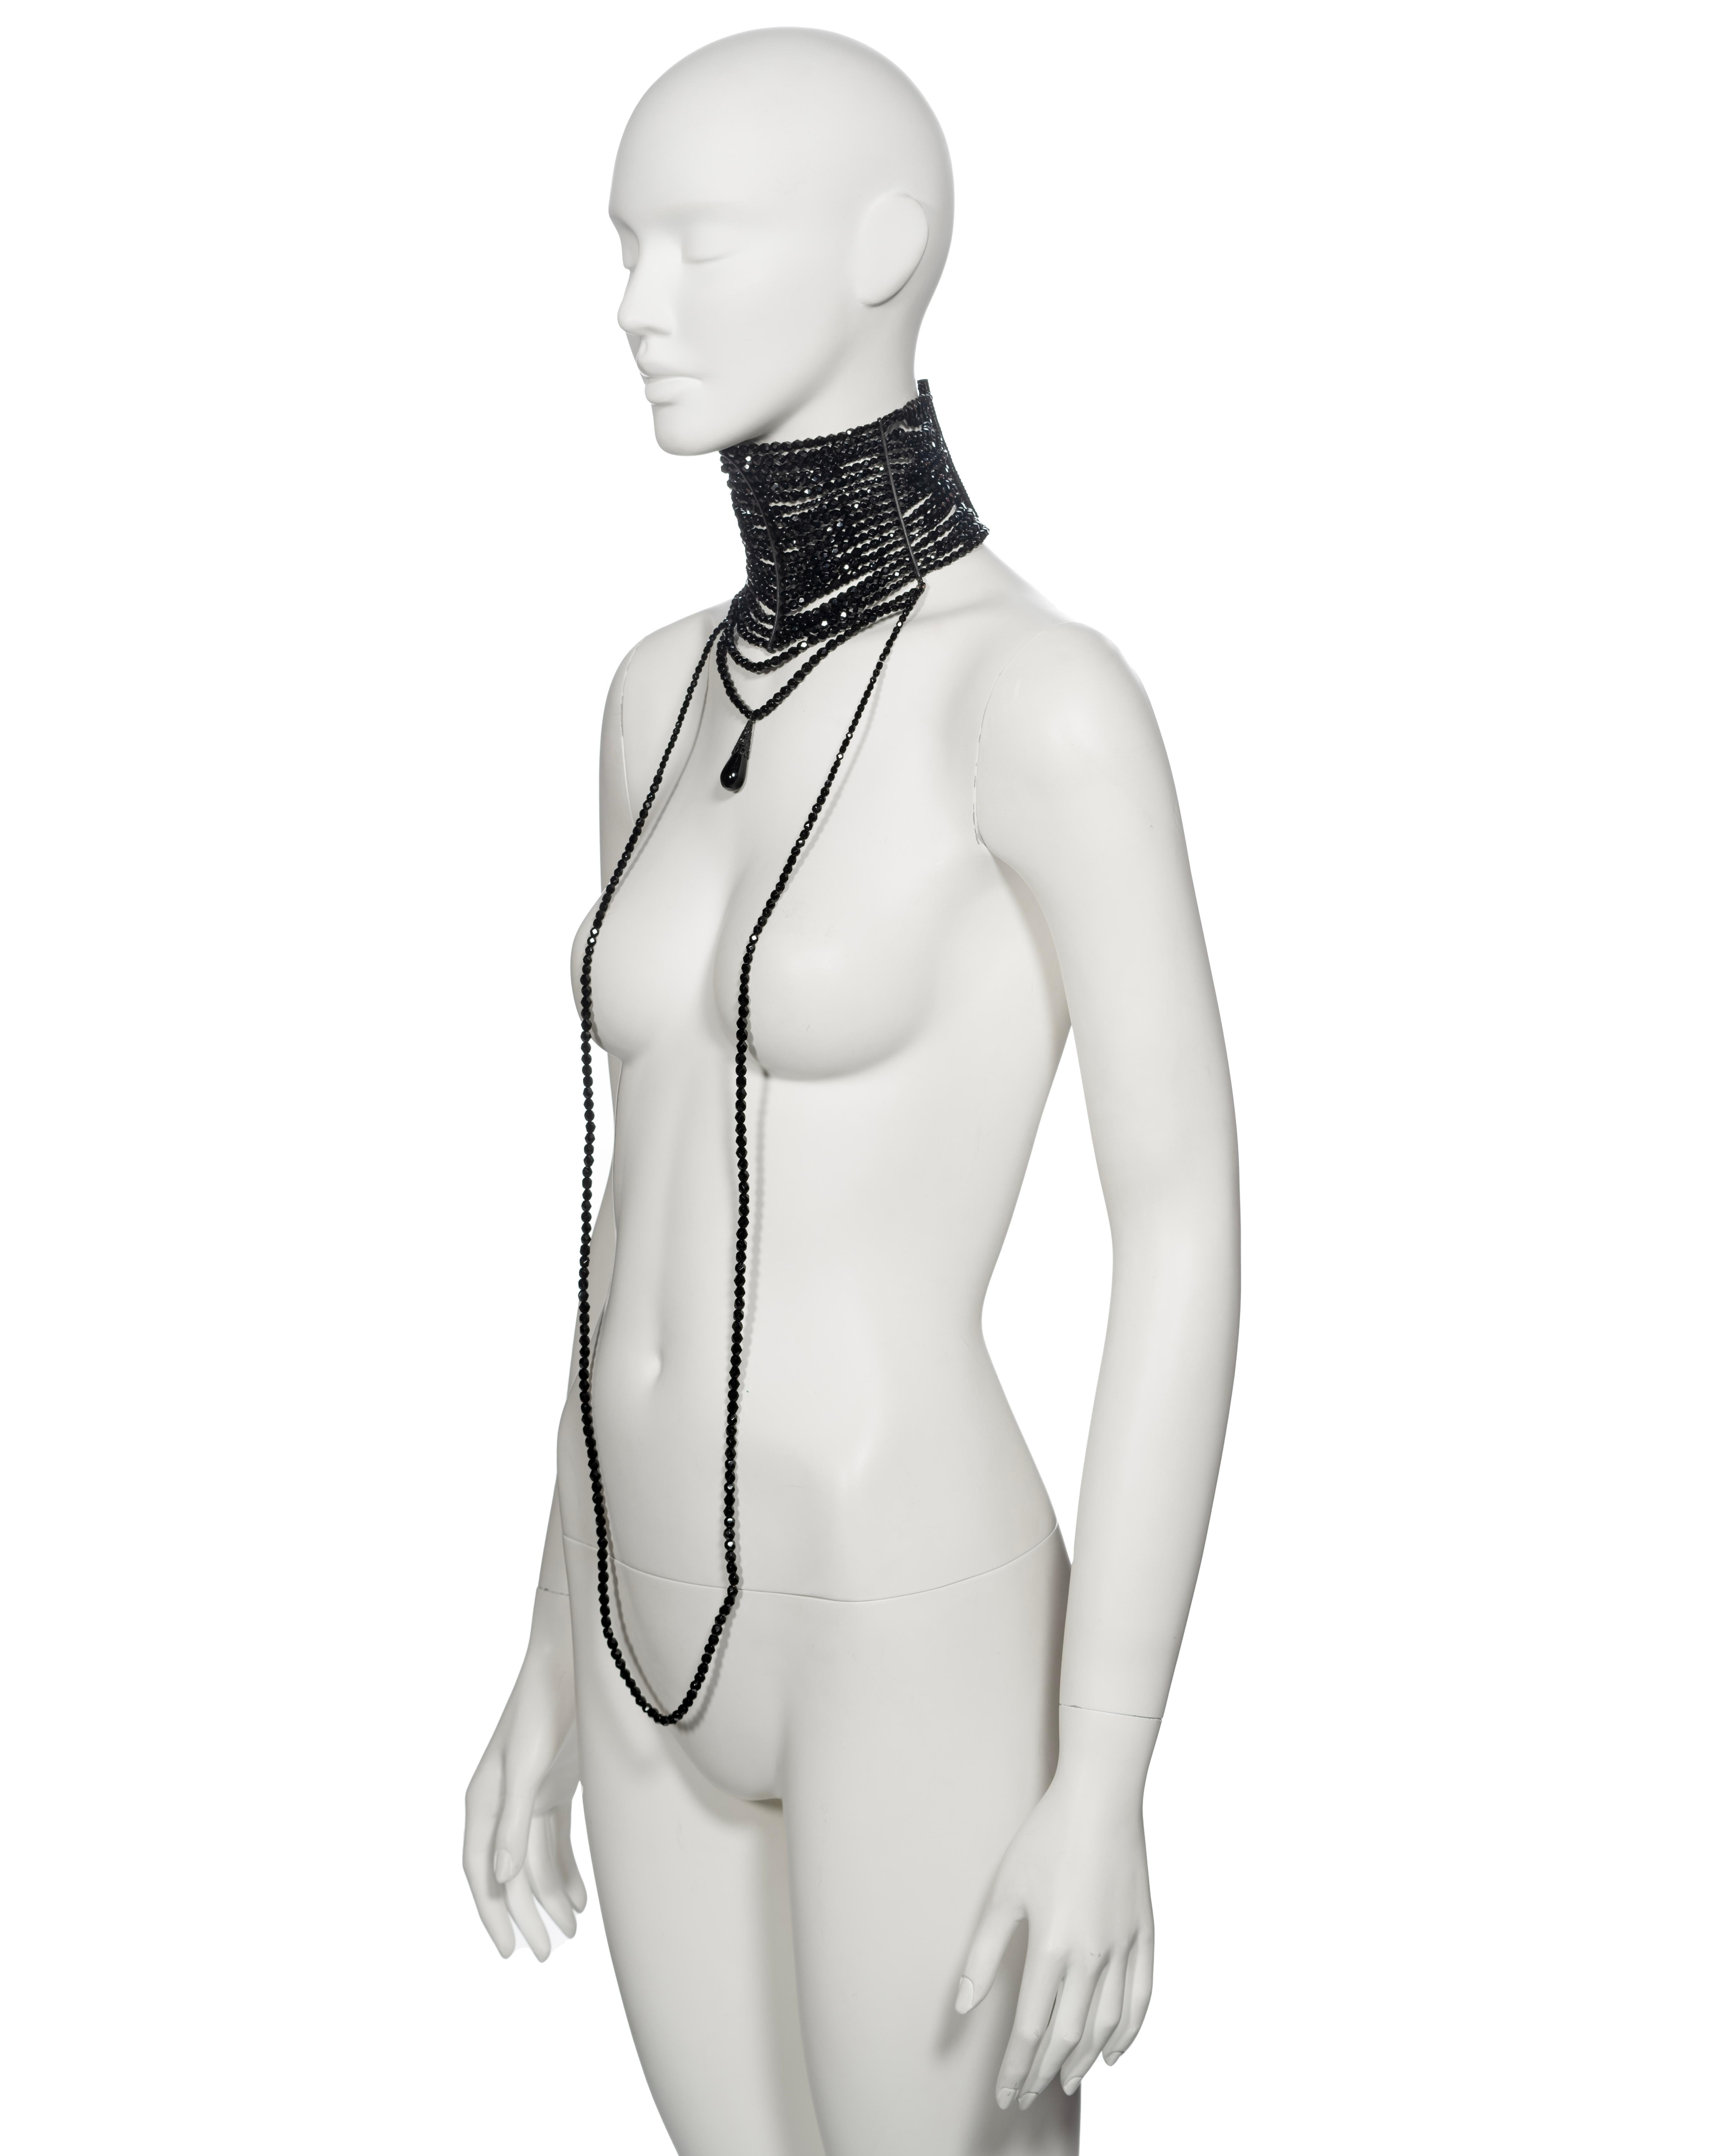 Christian Dior by John Galliano black beaded Masai choker necklace, ss 1999 For Sale 10